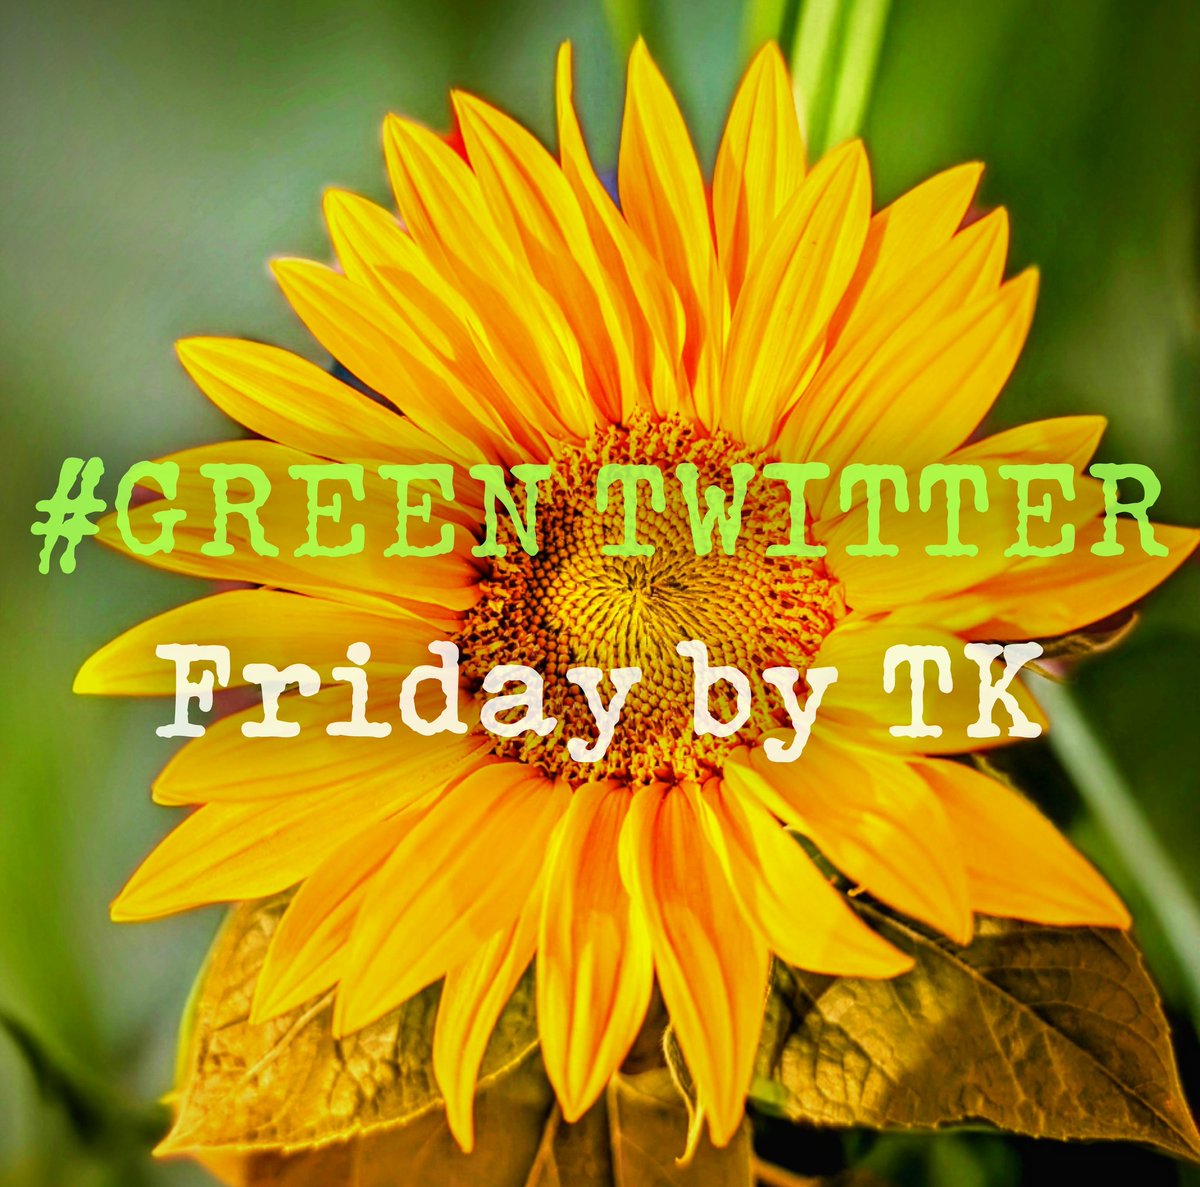 It's #GreenTwitter Friday with @TurboKitty . Click the hashtag to follow loads of great people. #solidarity